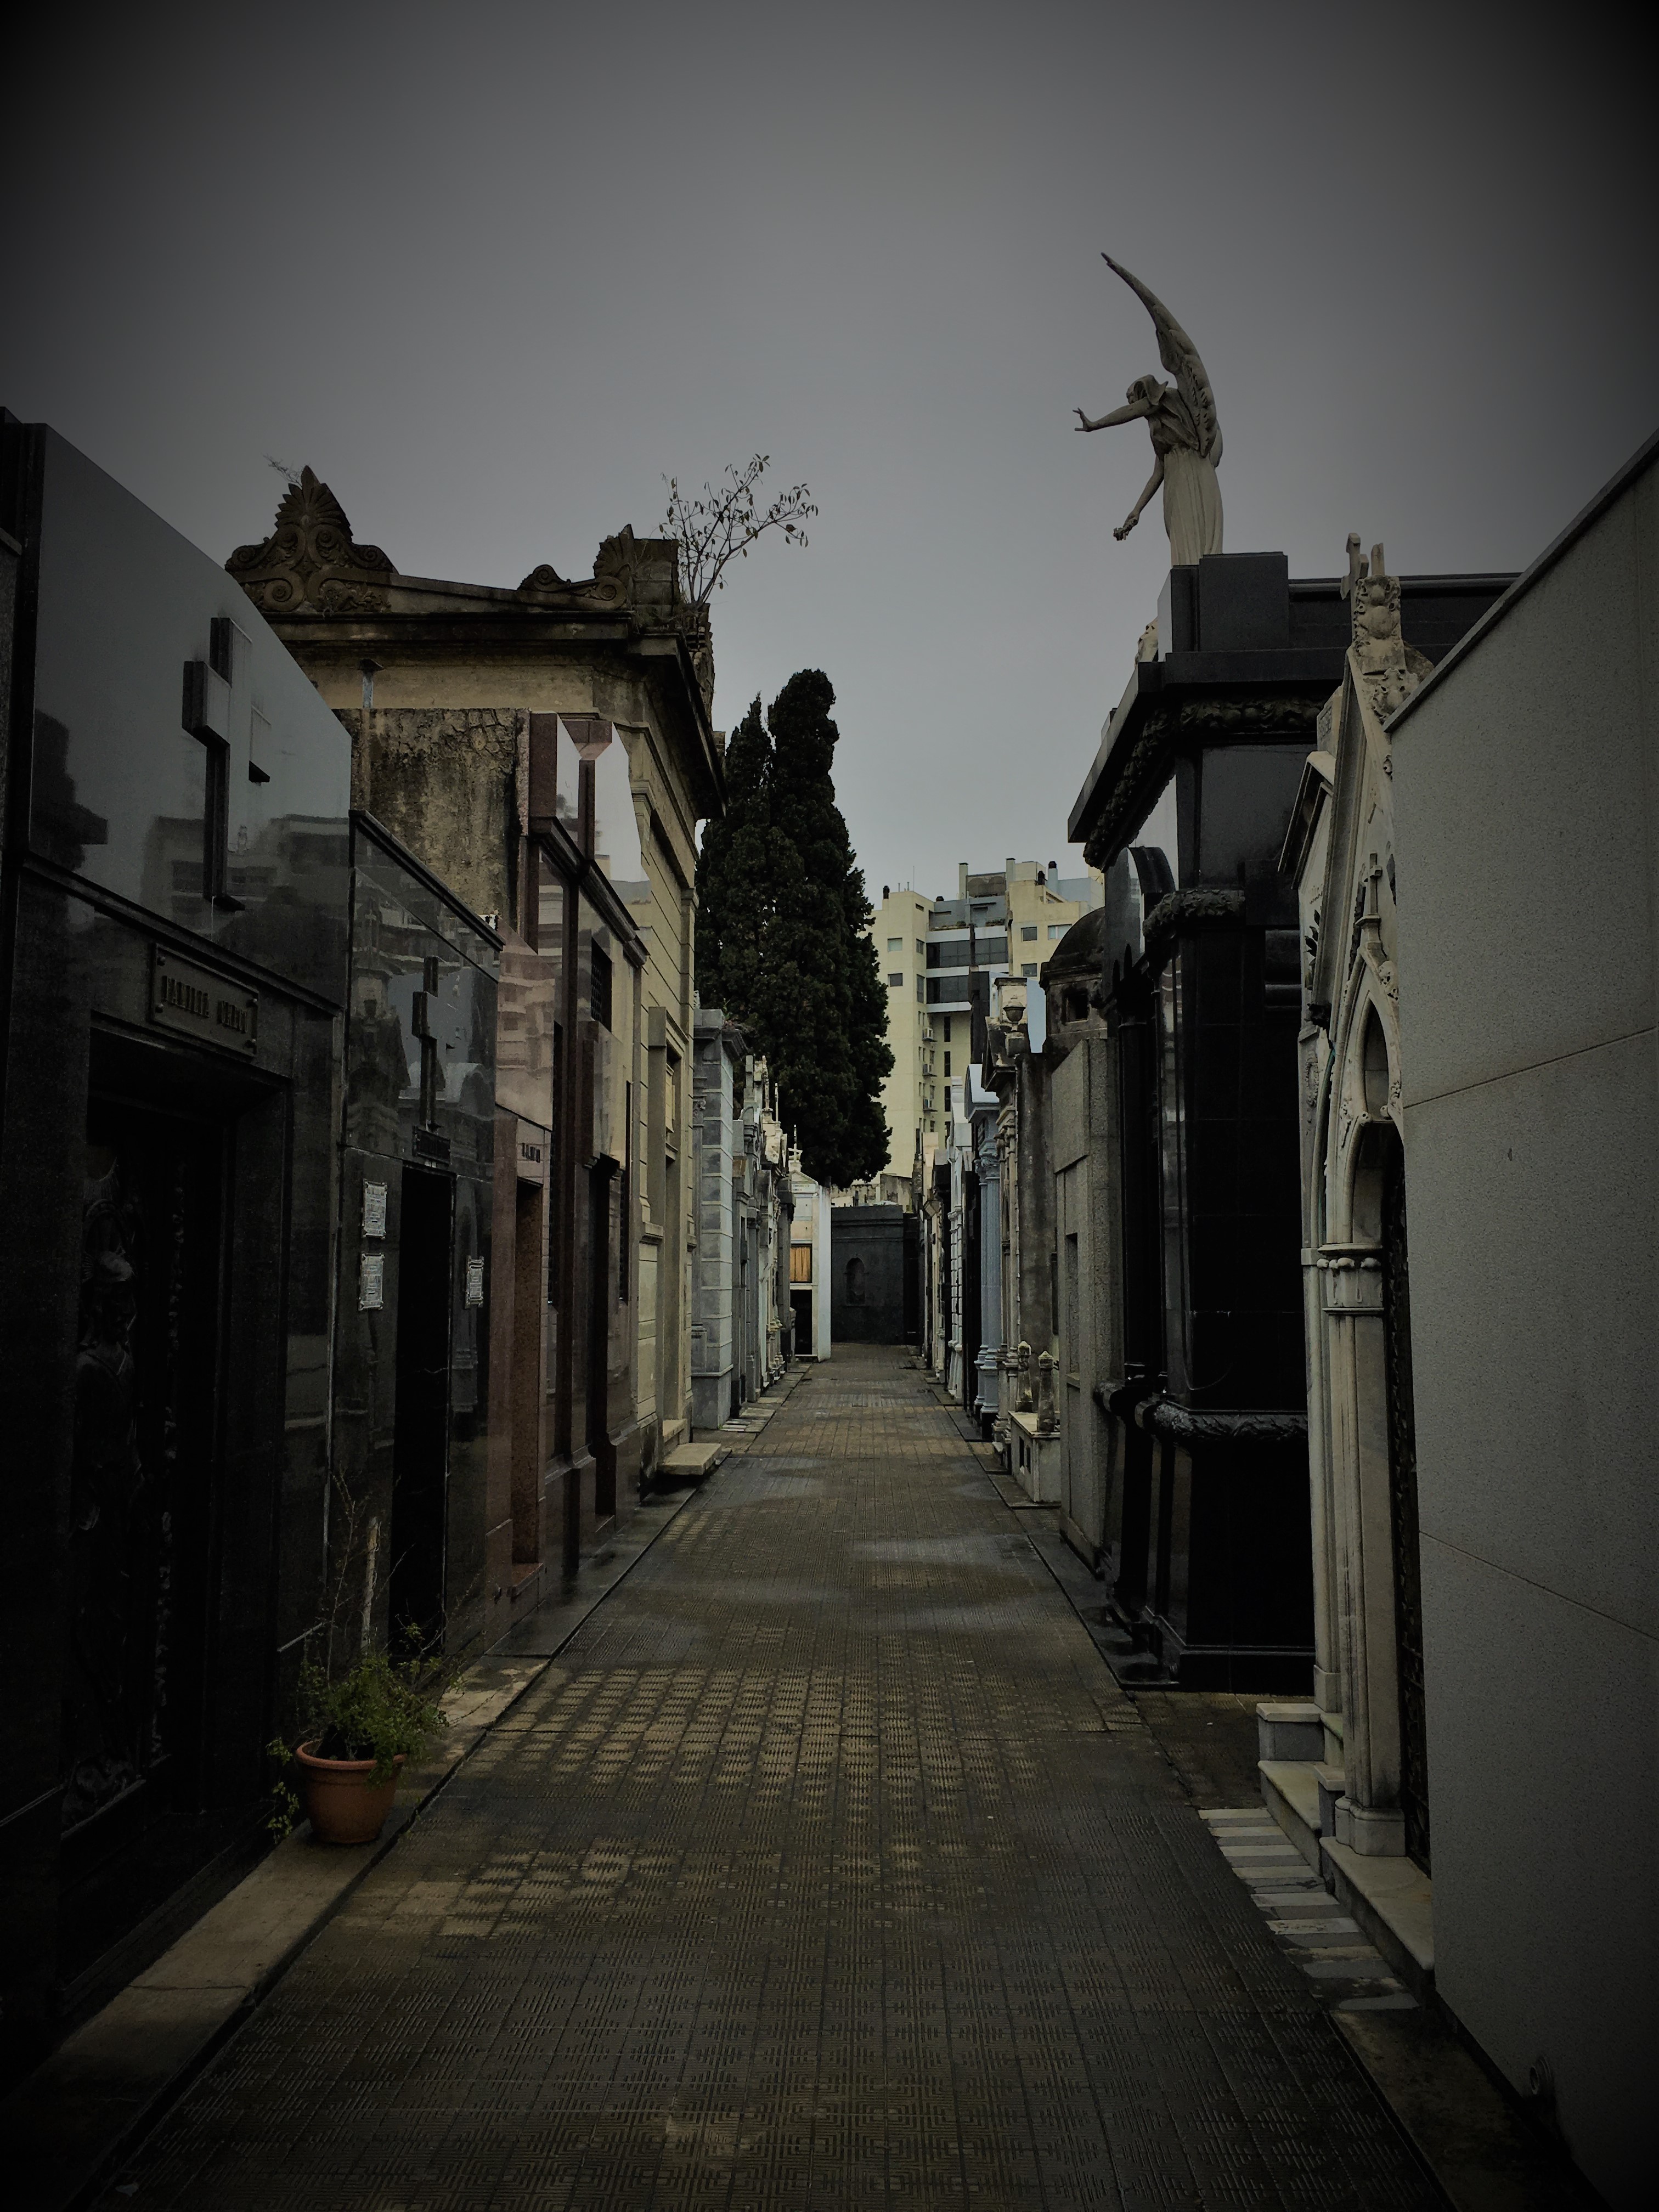 Cemetery Postcards aka Recollections of Recoleta